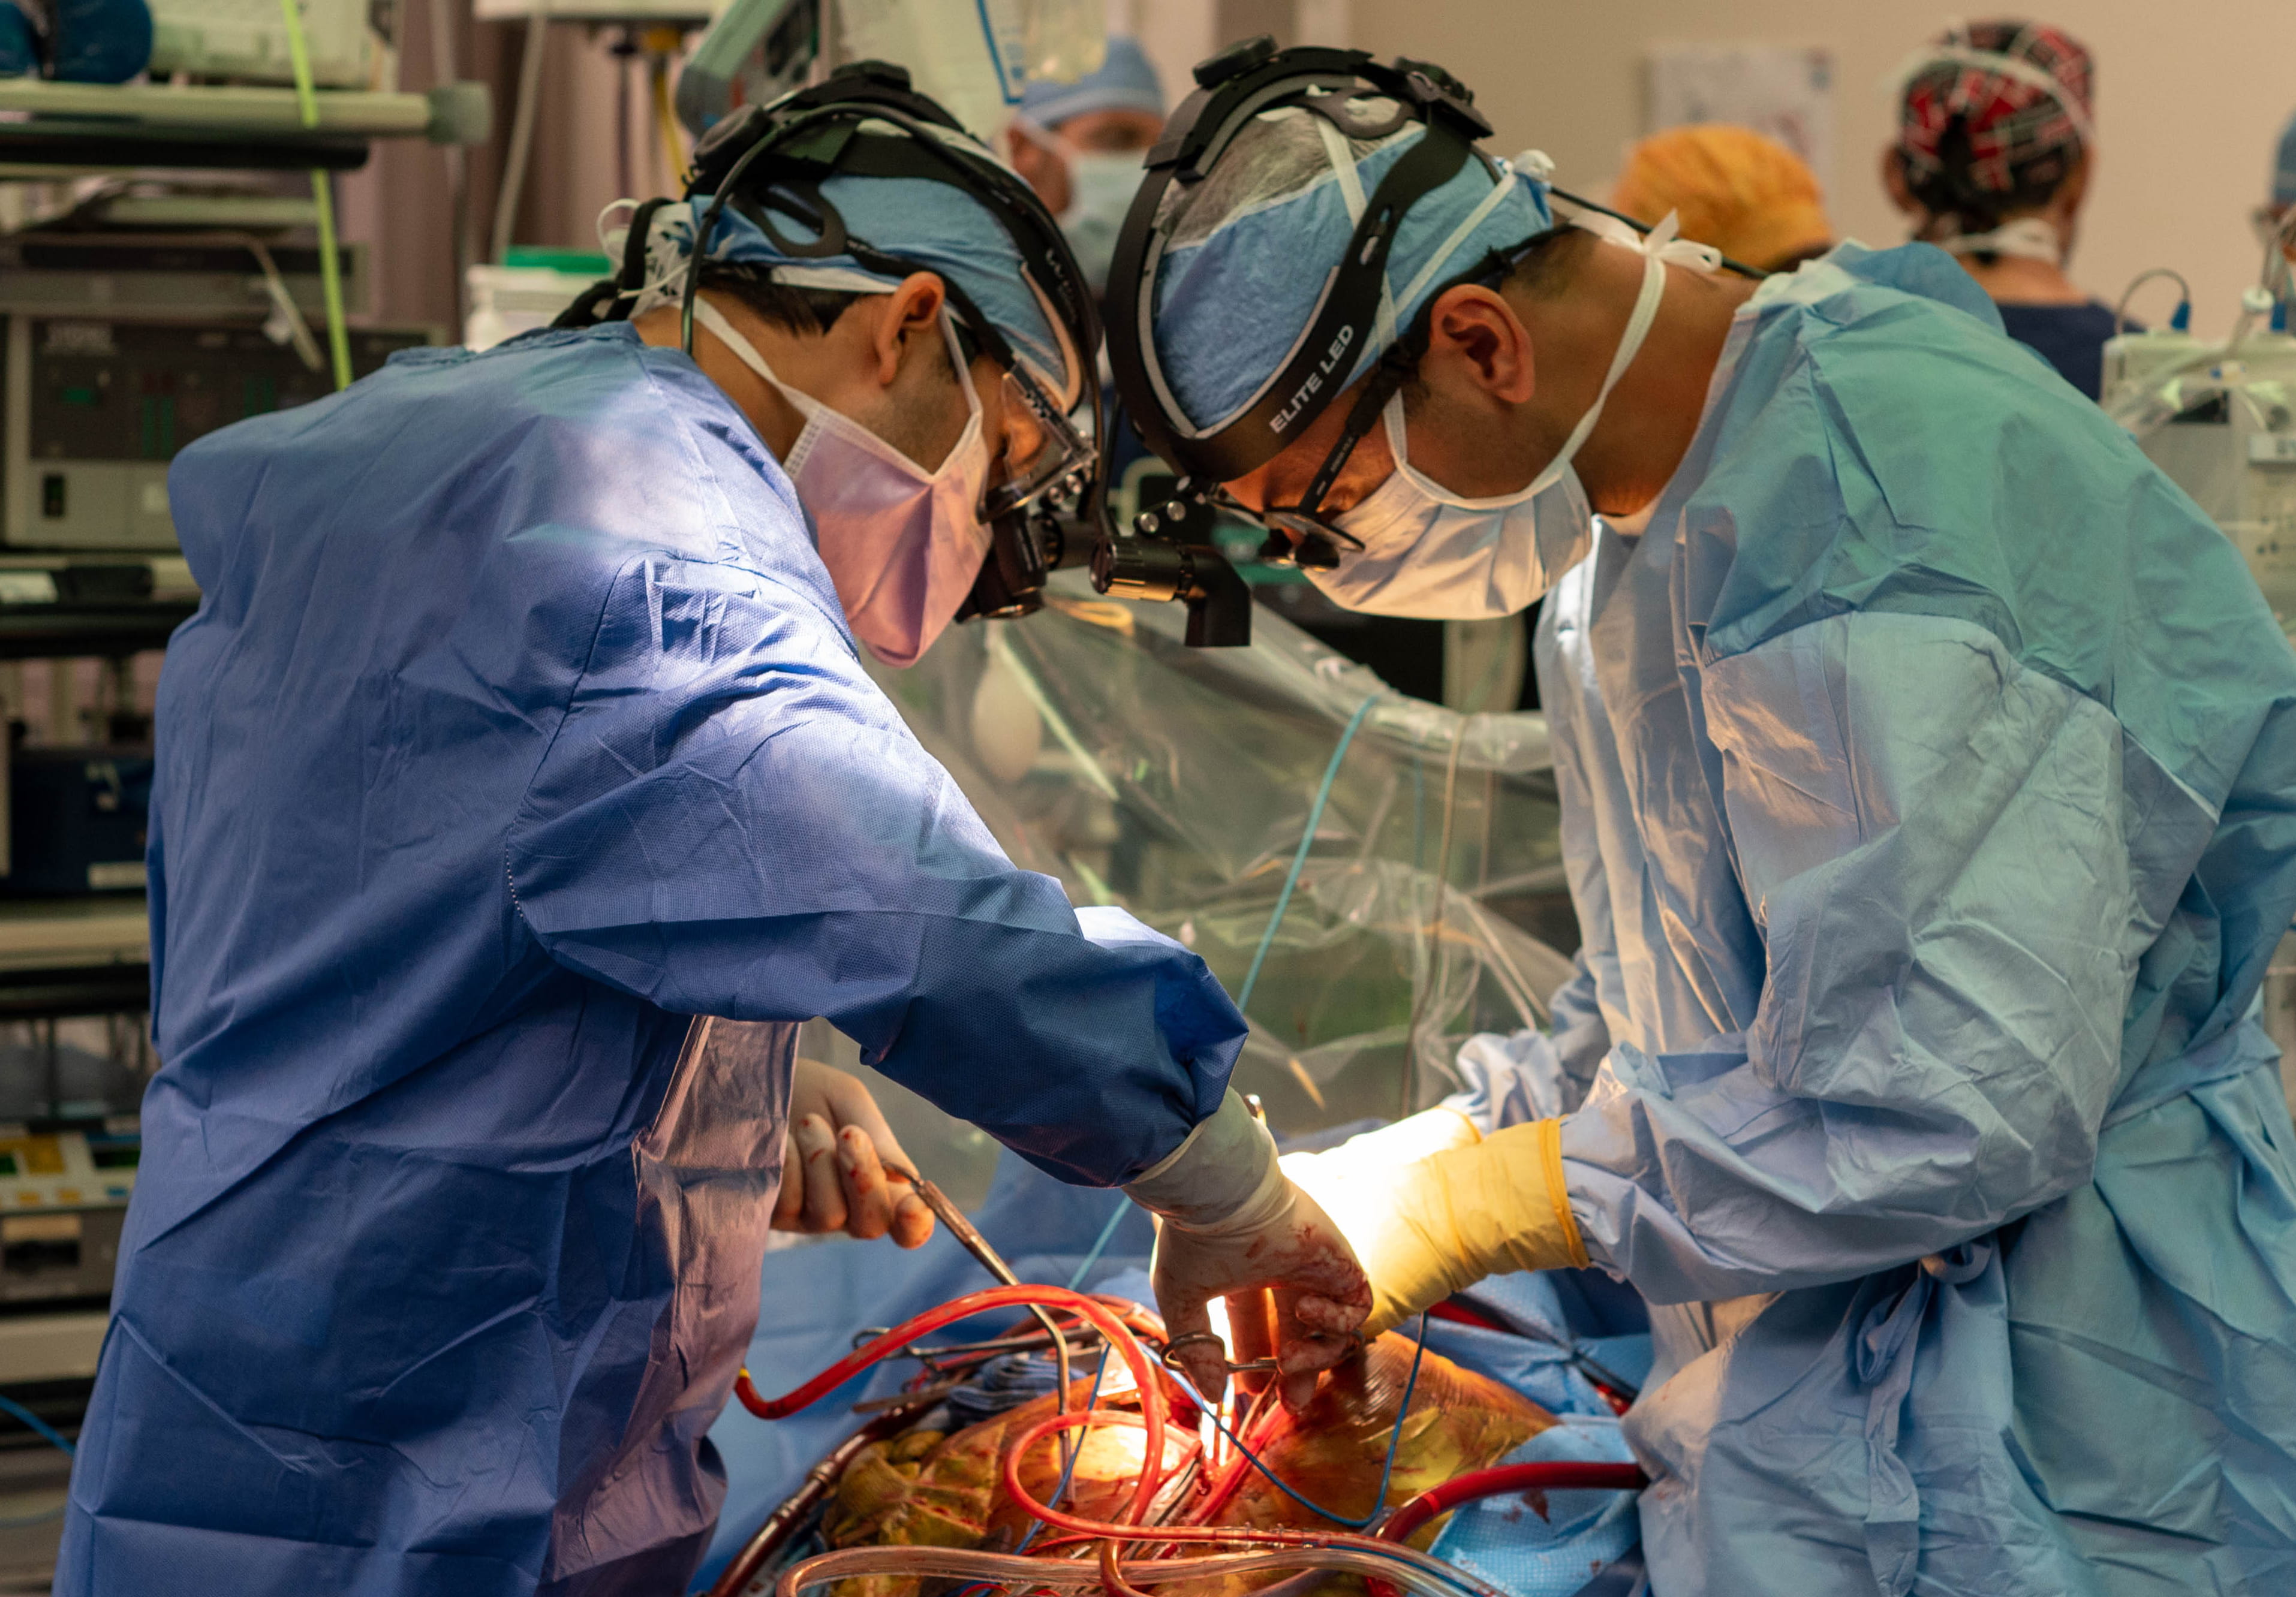 Two surgeons performing open-heart transplant surgery